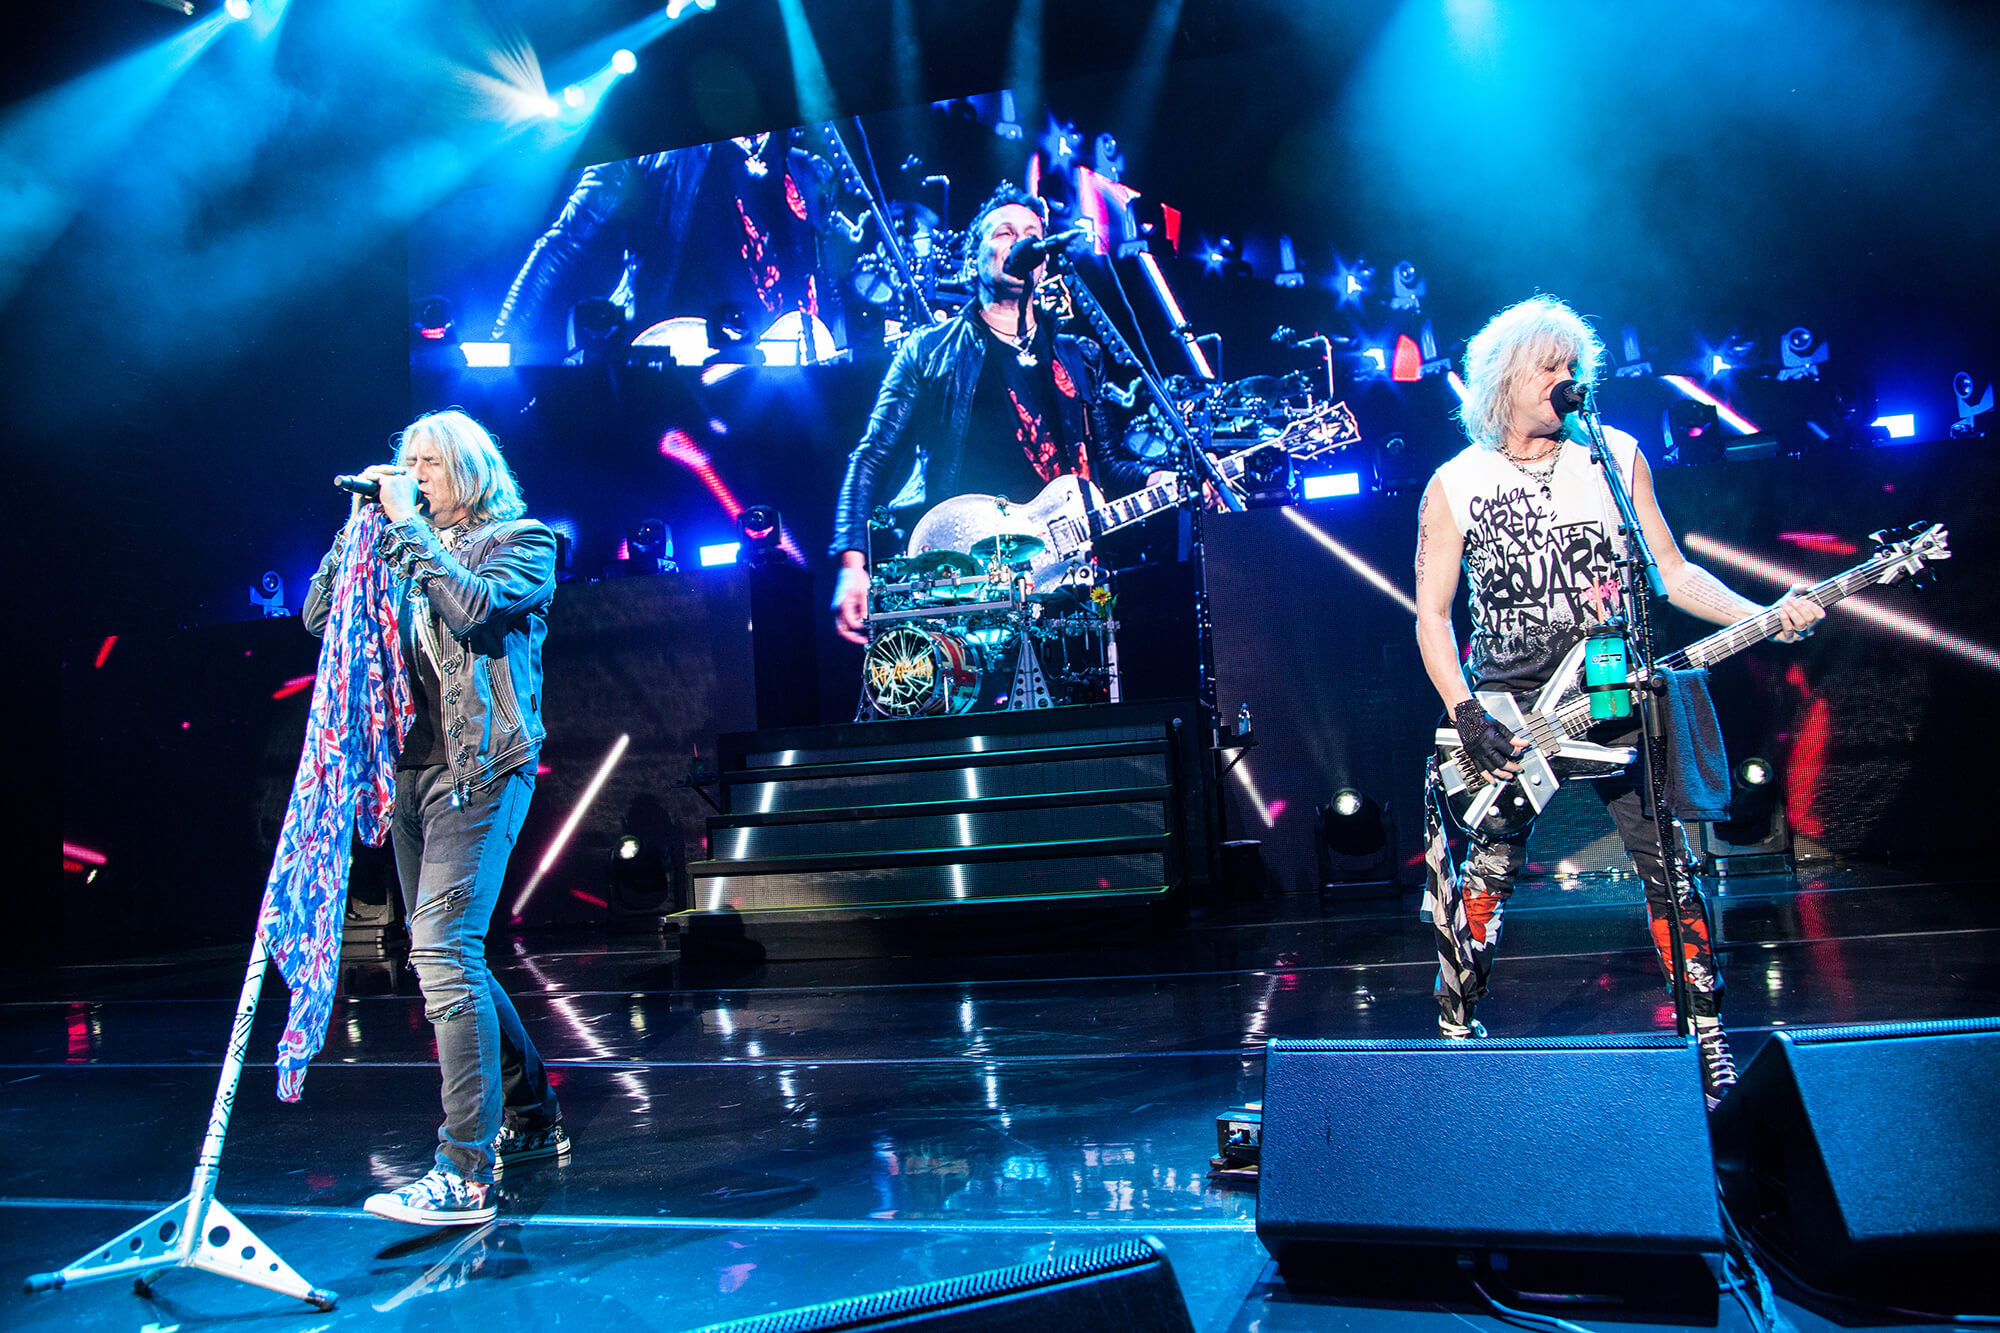 Def Leppard Hits Vegas The Sin City Residency The Ritz Herald